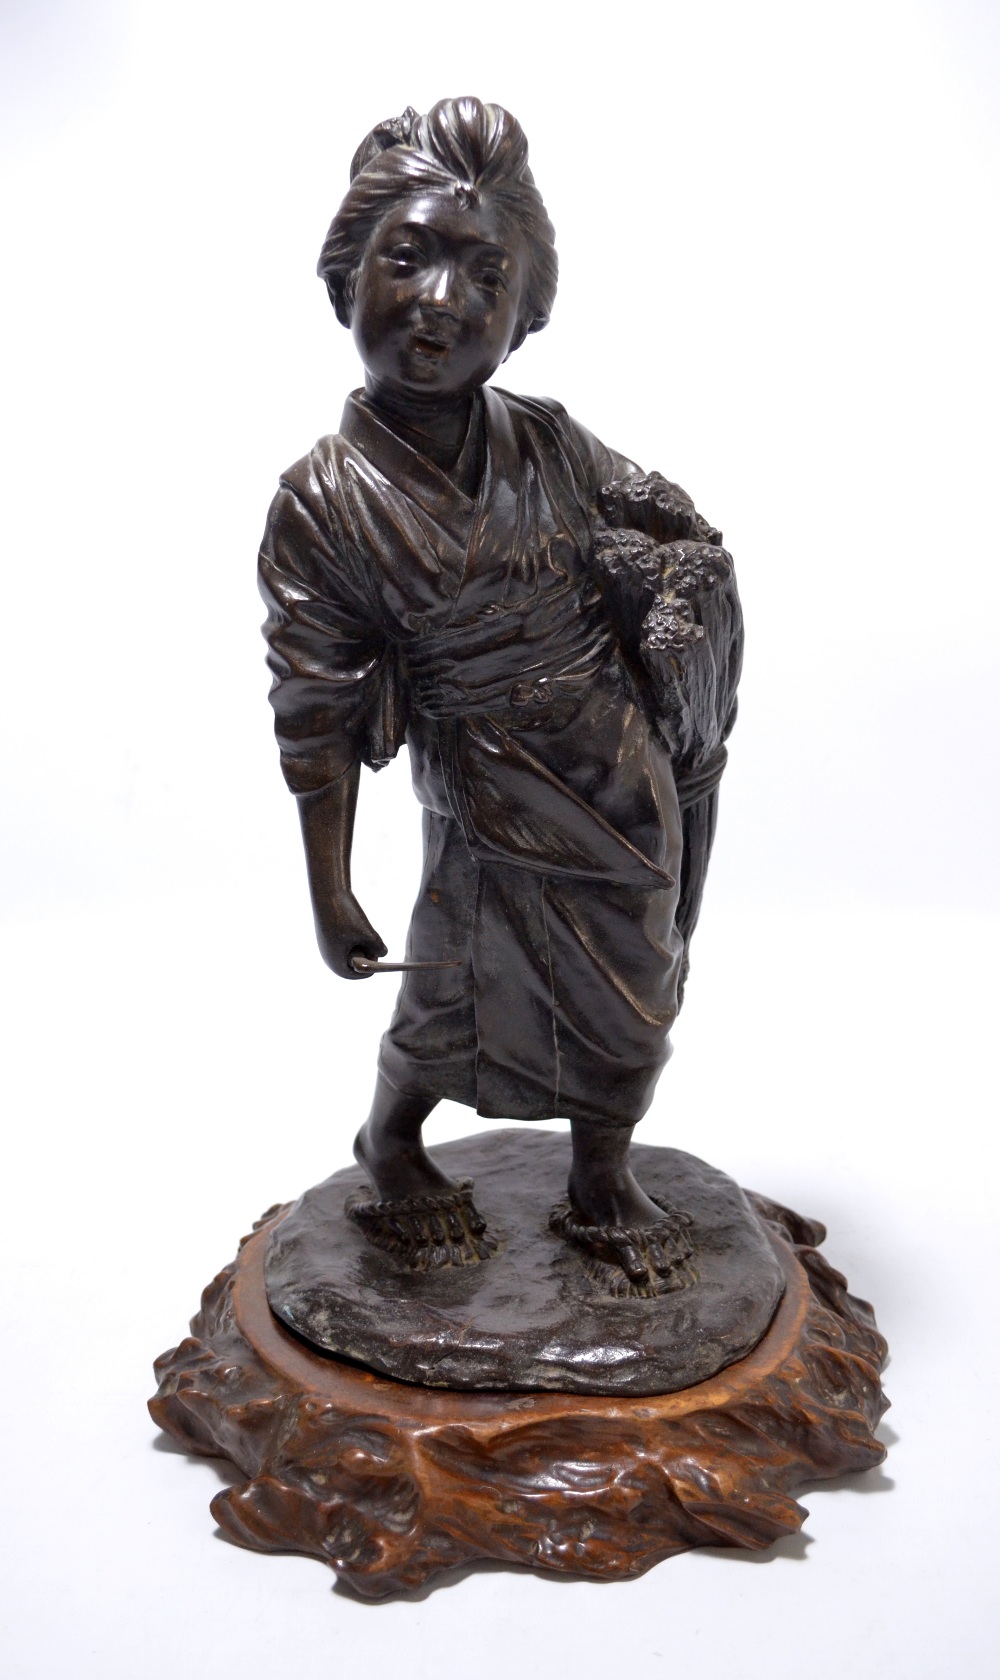 A Japanese late Meiji period bronze figure of a harvesting woman with small scythe and a sheaf of